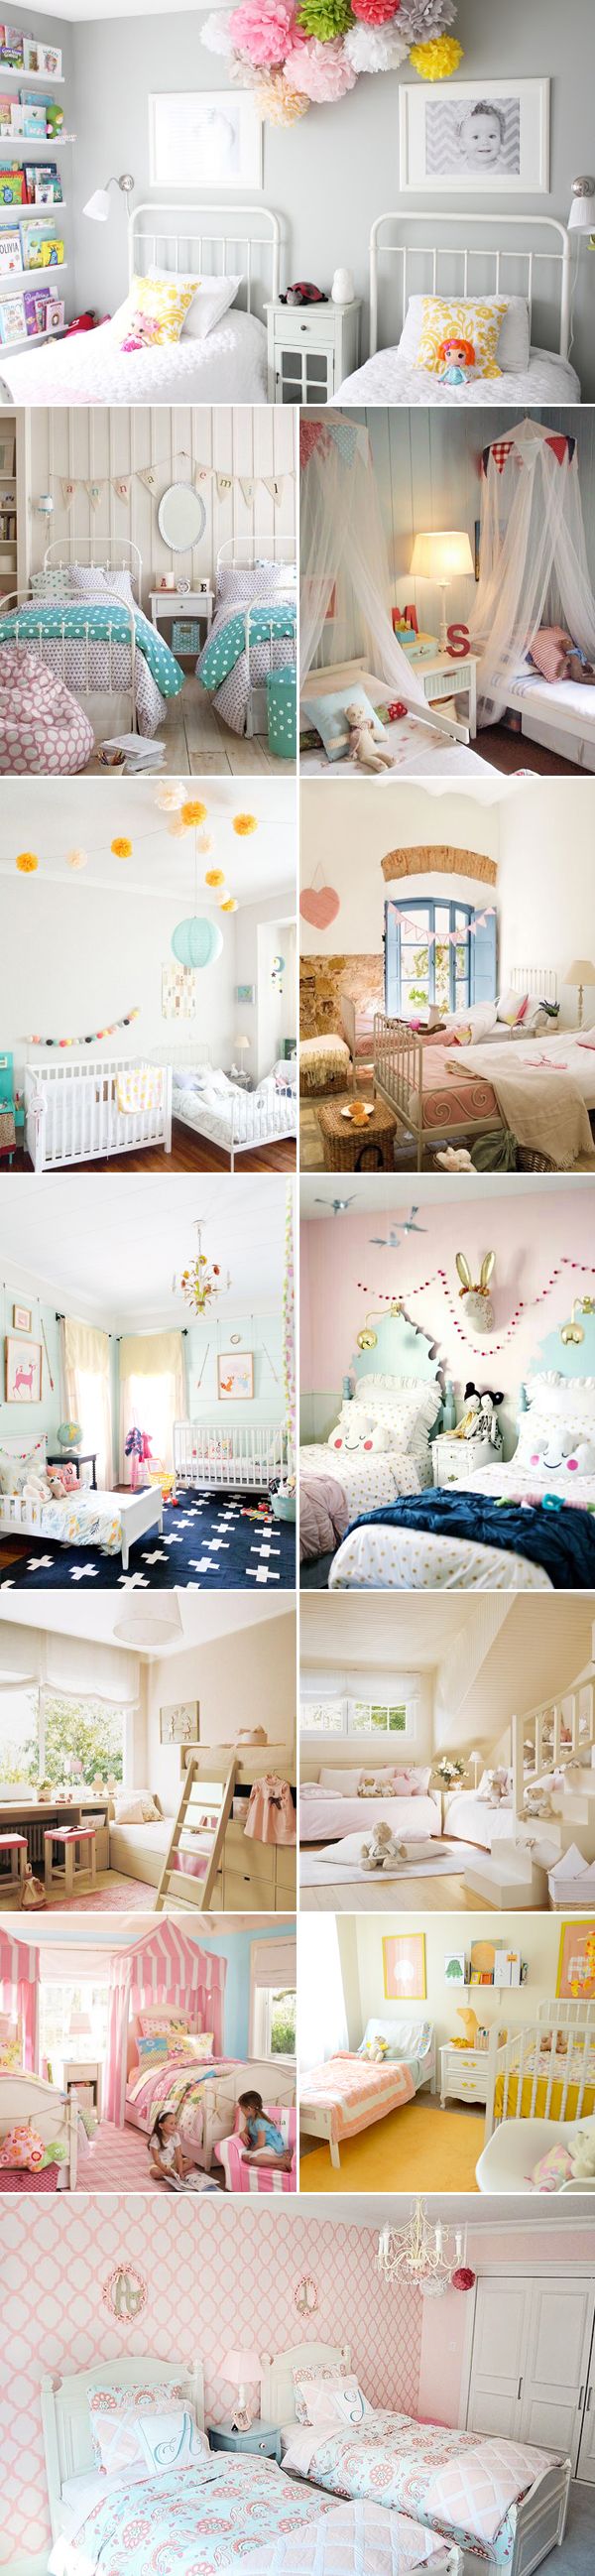 Best Sisters Shared Bedrooms Ideas On Pinterest Sister Room 1